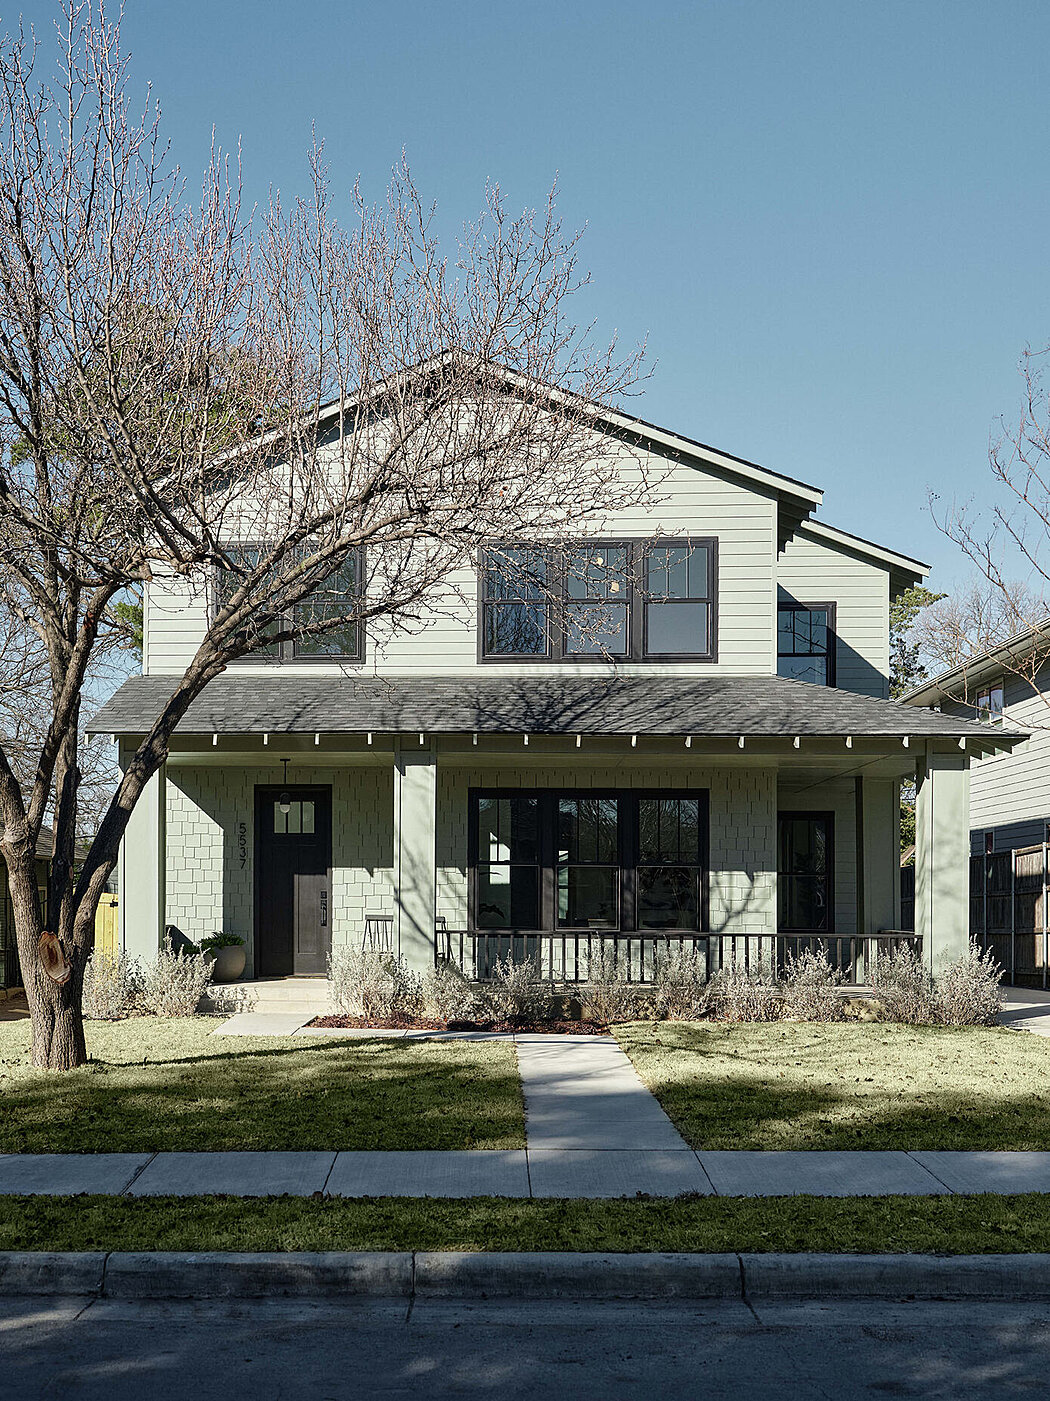 Richard House: Object & Architecture’s Modern Take on Traditional Craftsman Homes - 1